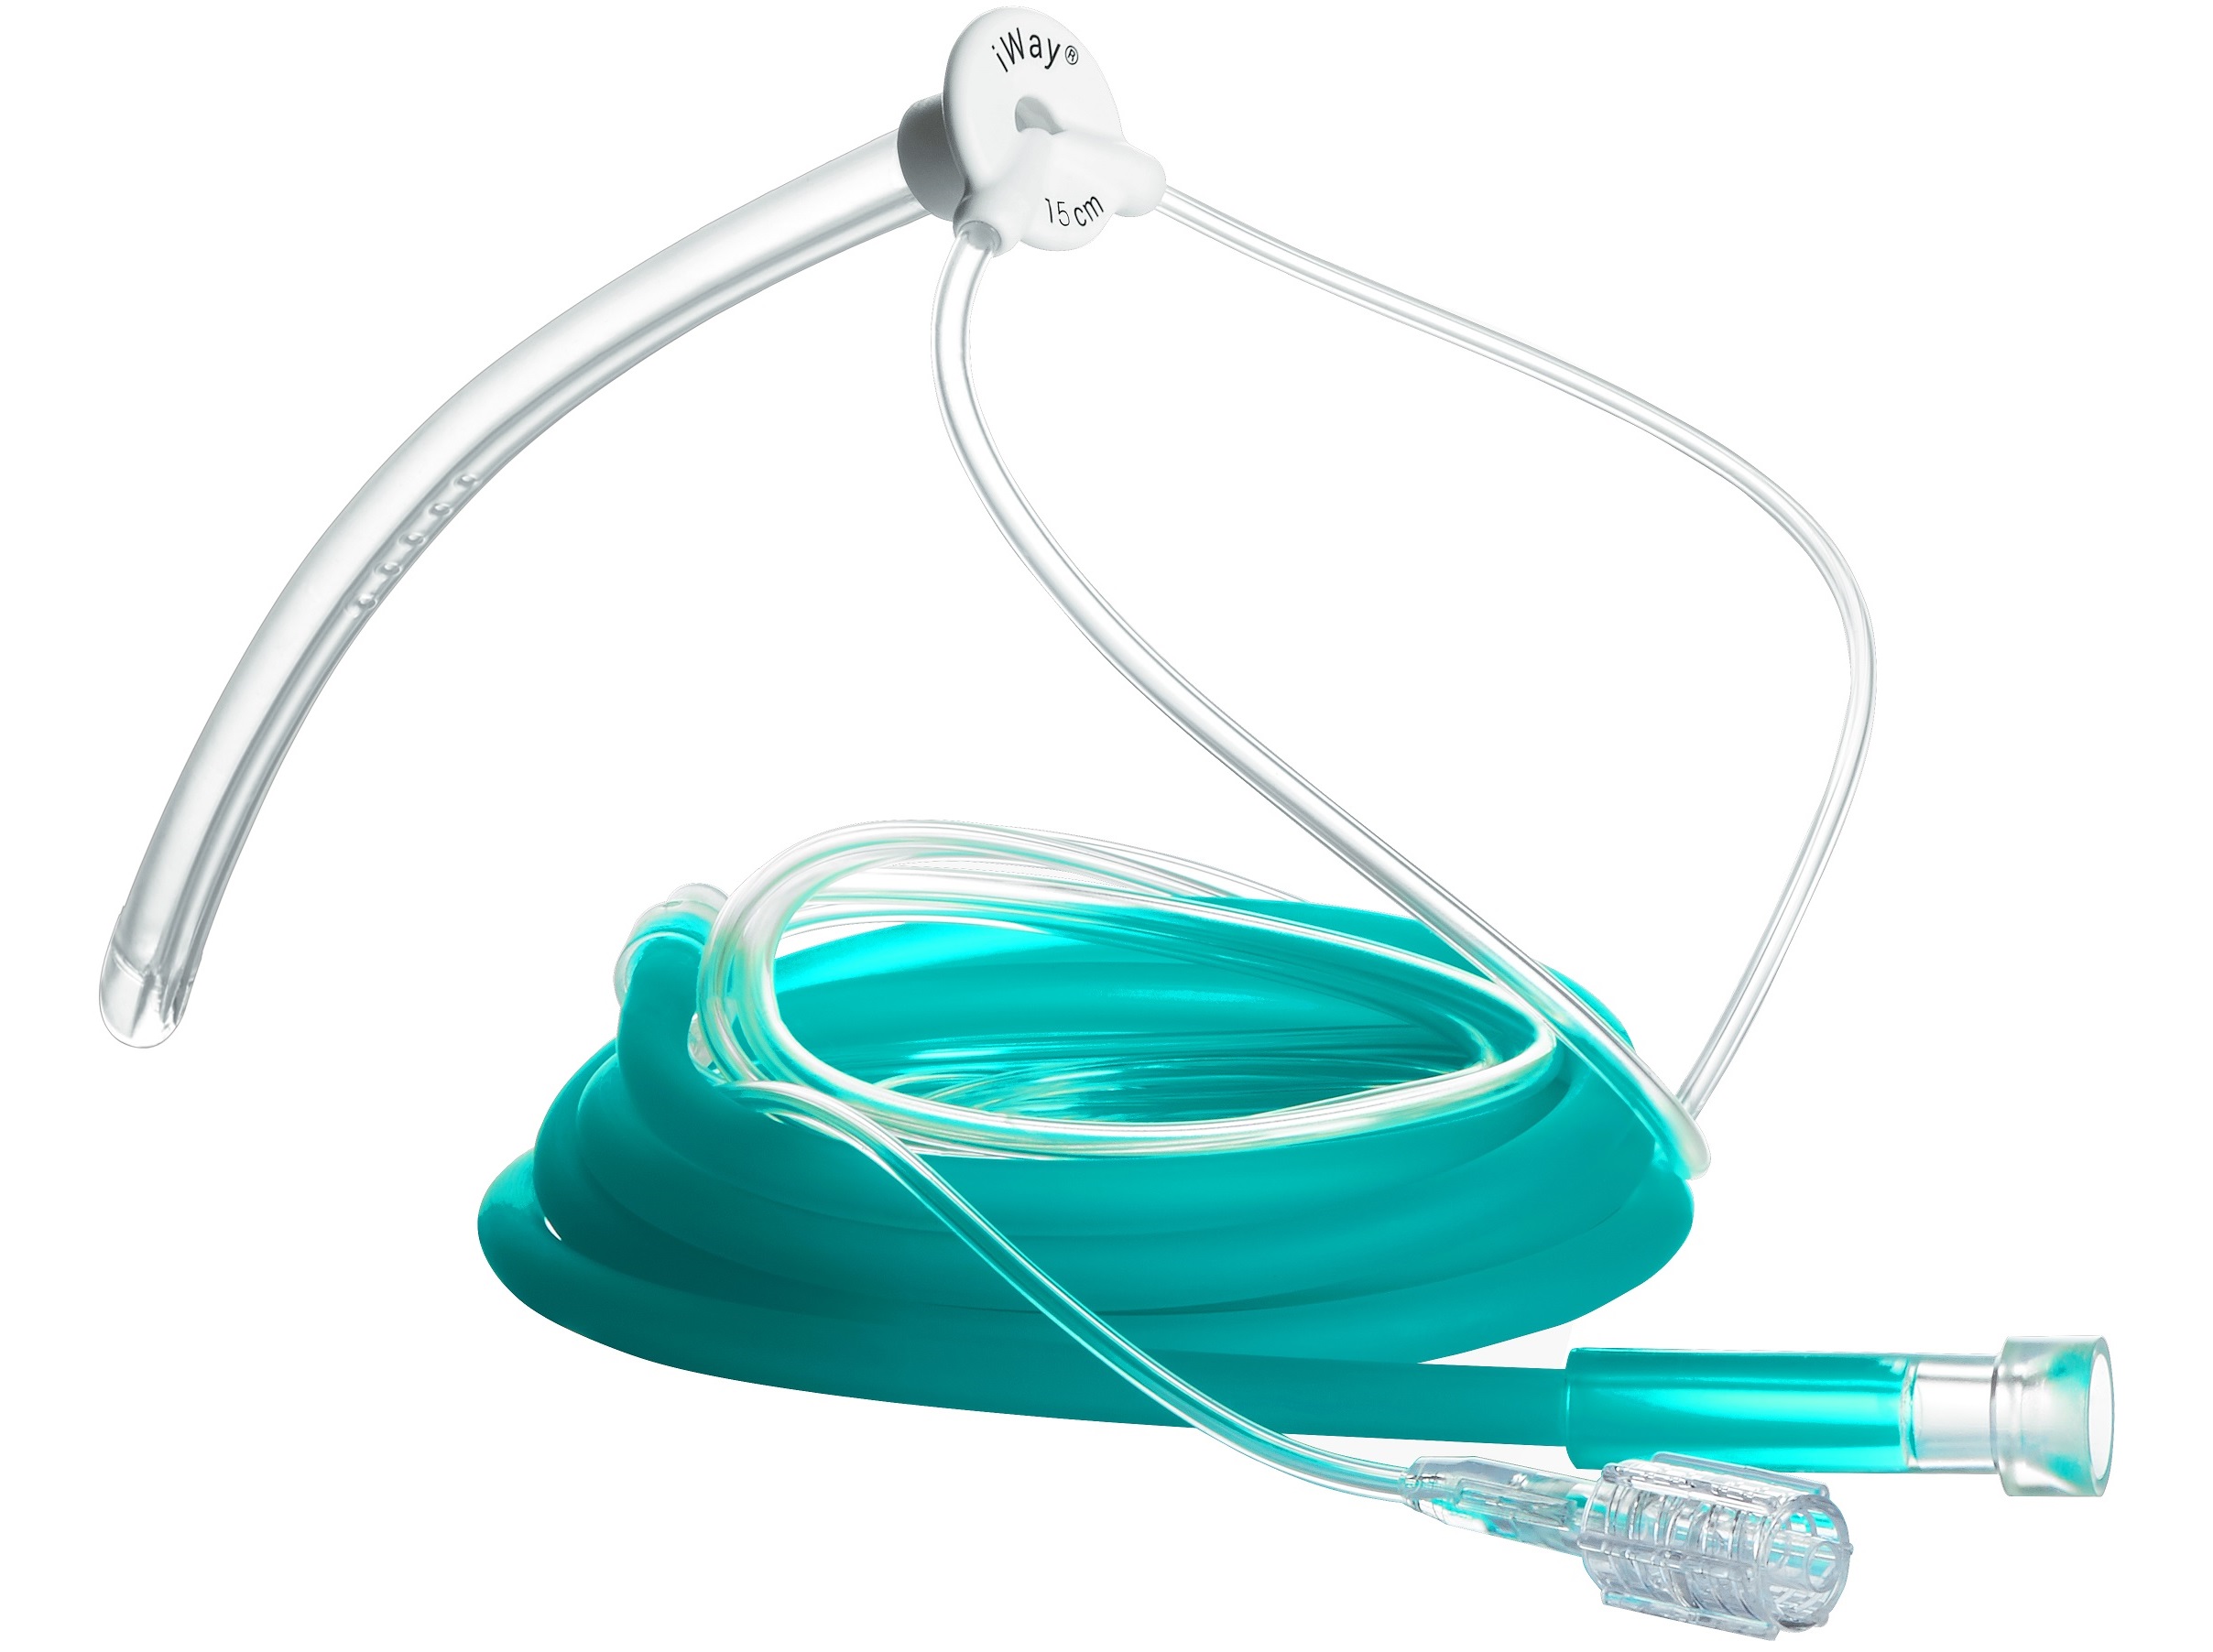 iWay - Advanced minimally invasive nasopharyngeal airway for efficient oxygenation and accurate capnography